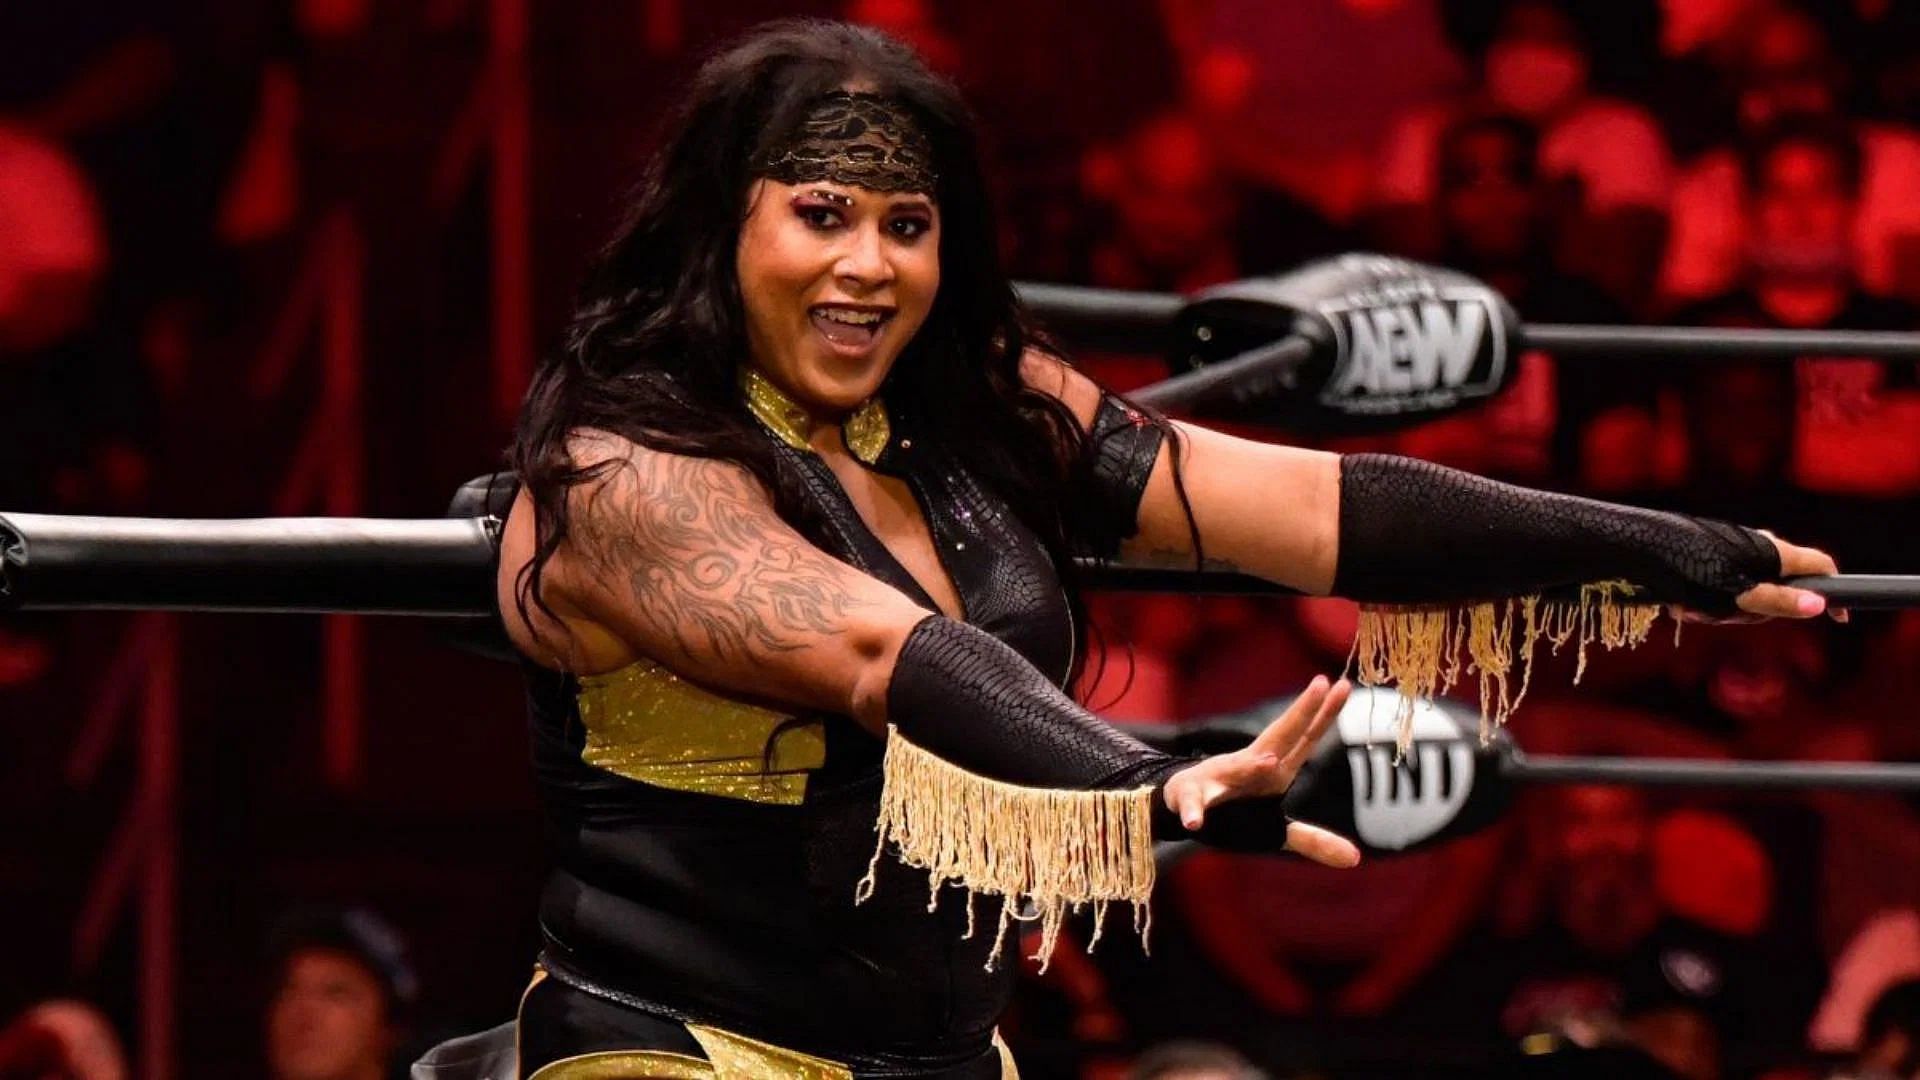 Nyla Rose is one of the top AEW stars of the women